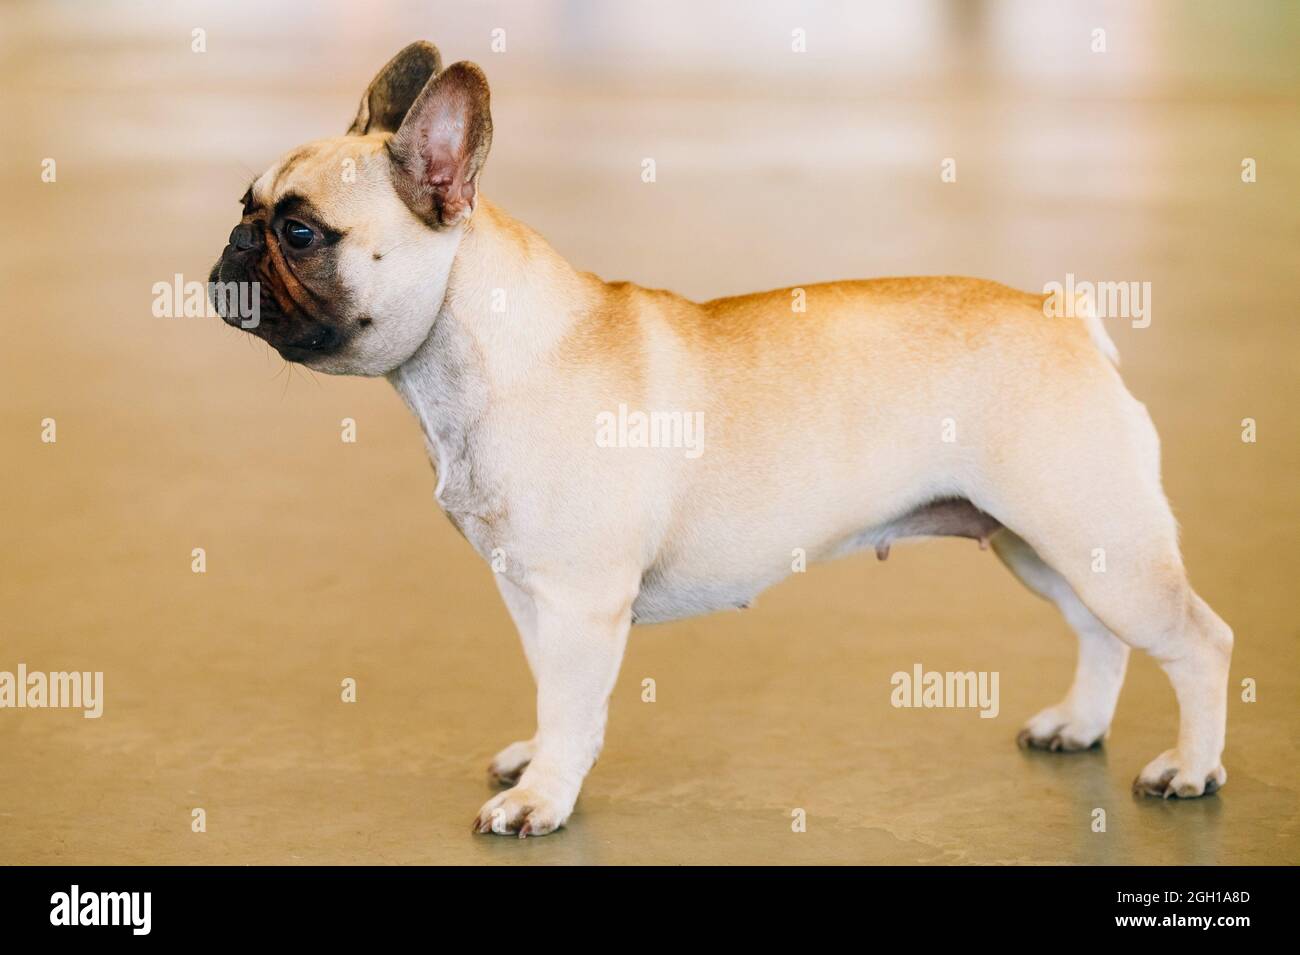 Dog French Bulldog indoor. The French Bulldog is a small breed of domestic dog. Stock Photo